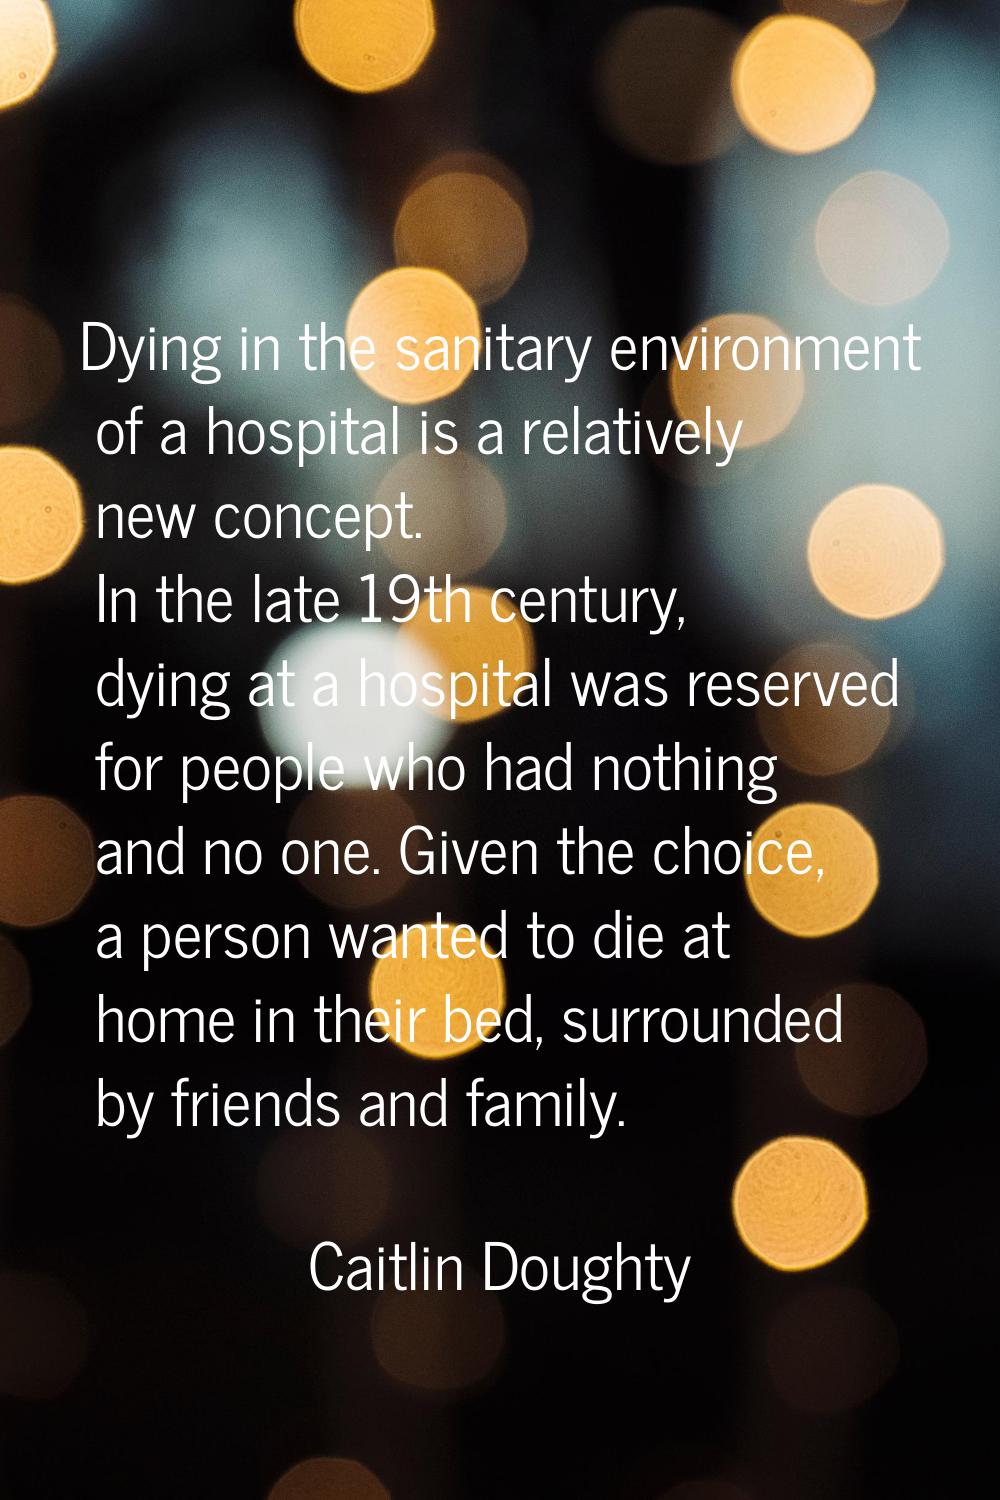 Dying in the sanitary environment of a hospital is a relatively new concept. In the late 19th centu